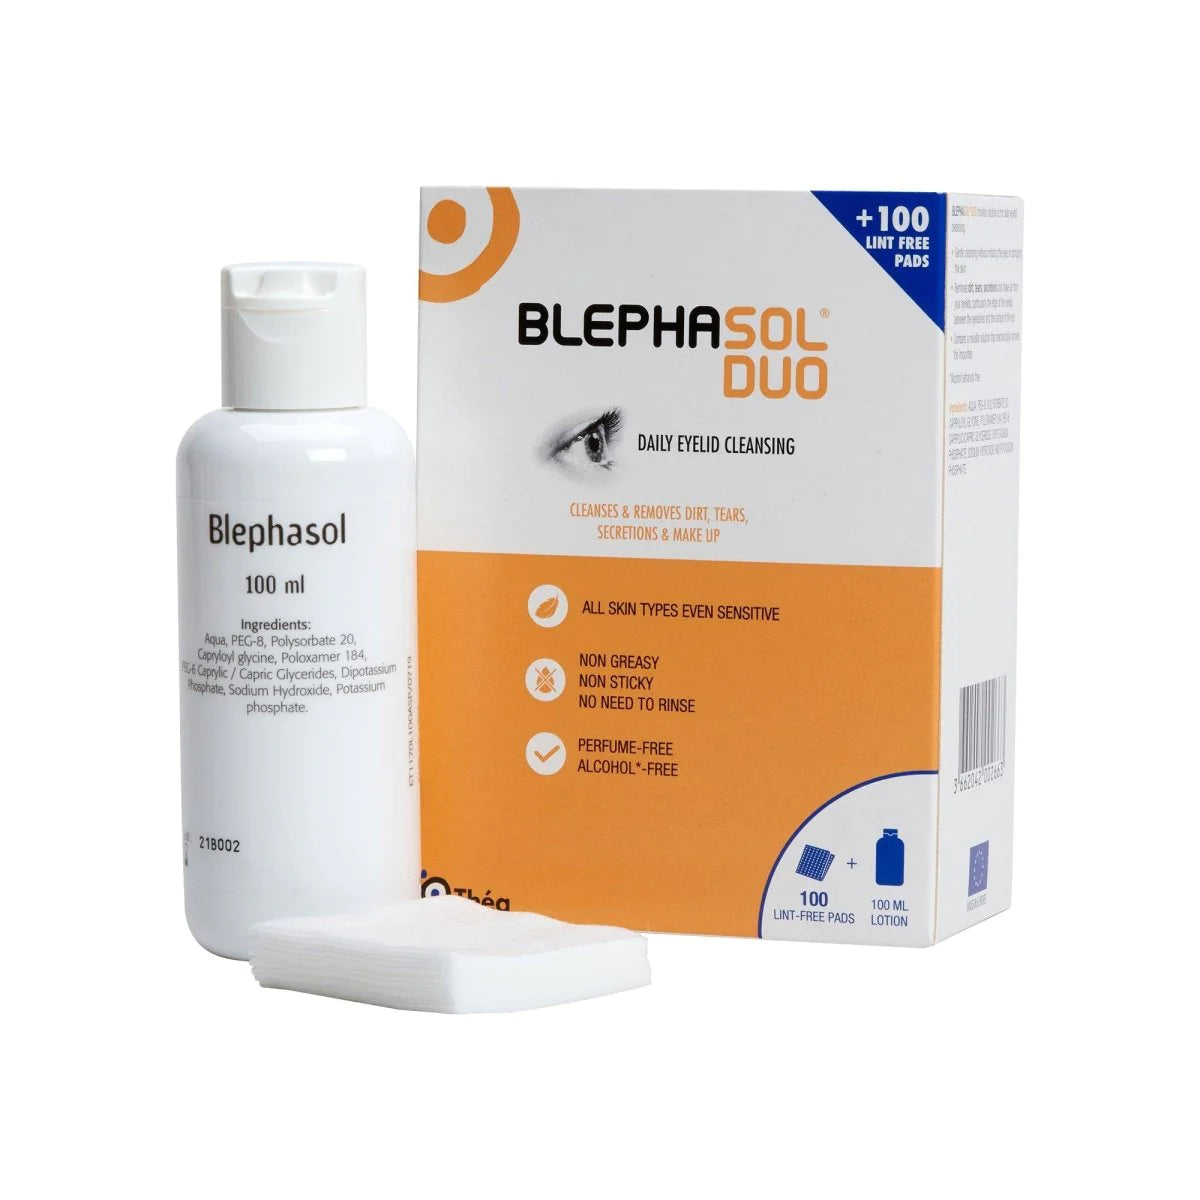 Blephasol Duo (100ml + 100 lint free pads)